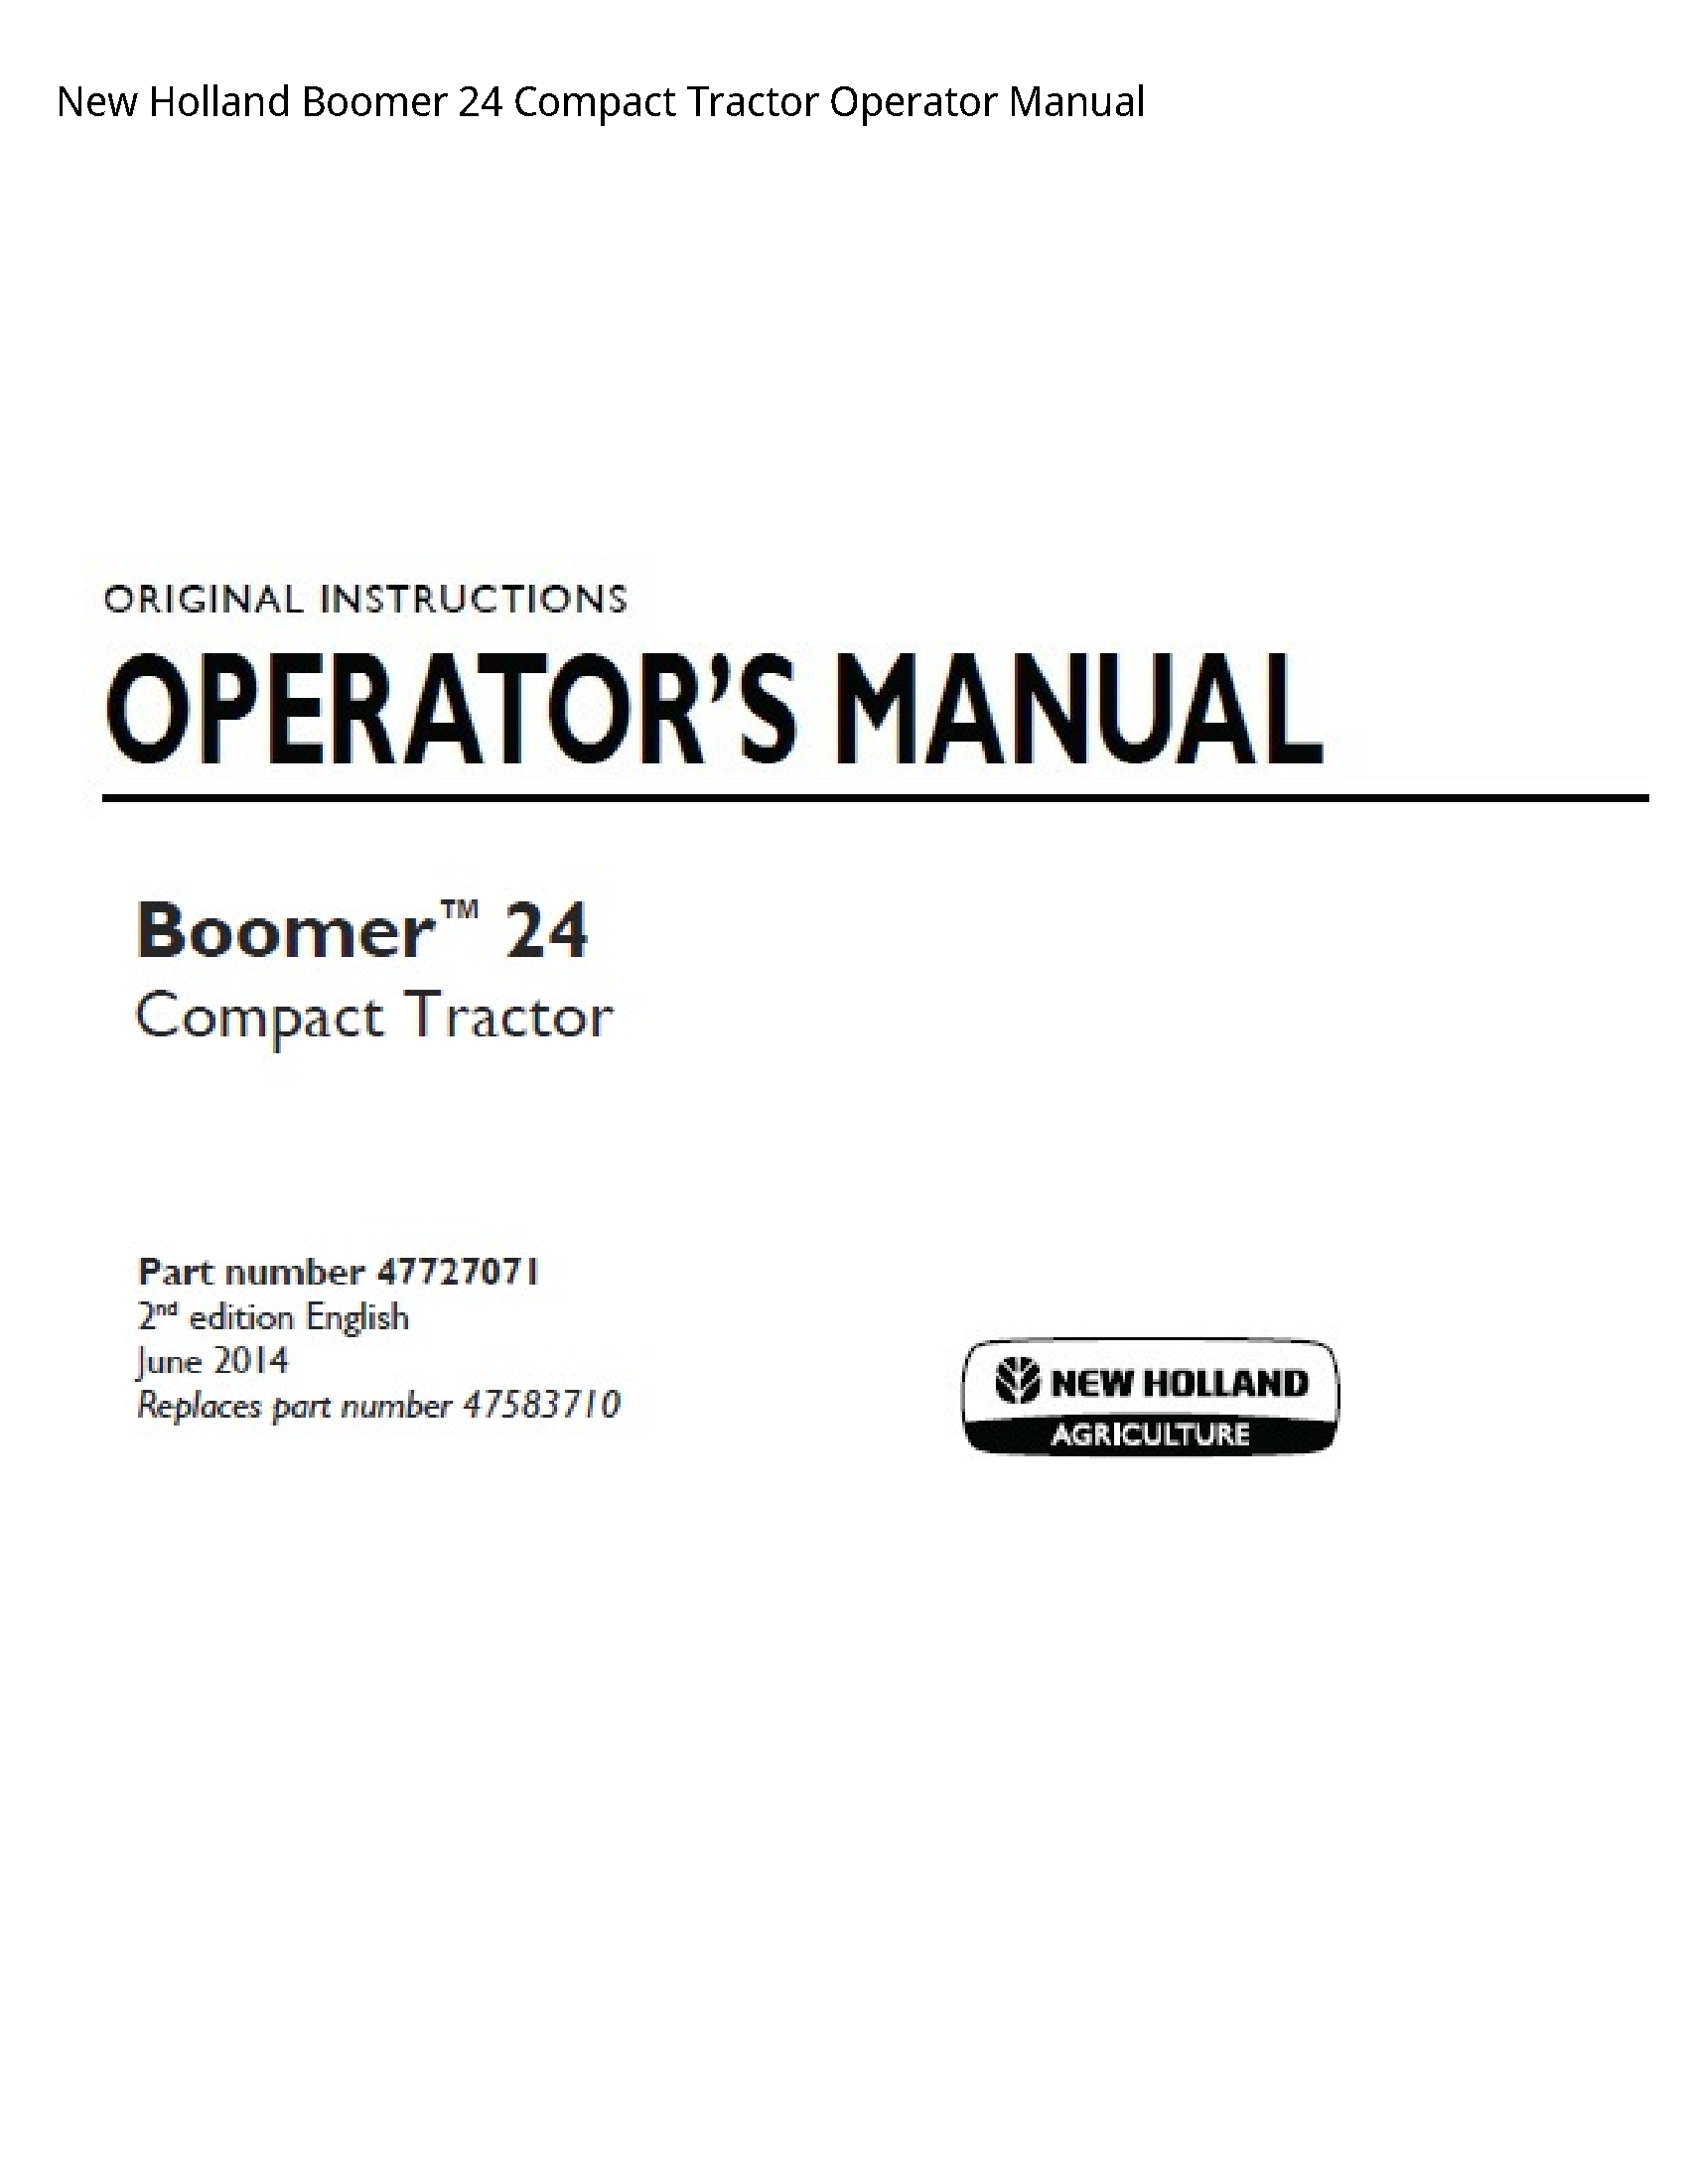 New Holland 24 Boomer Compact Tractor Operator manual